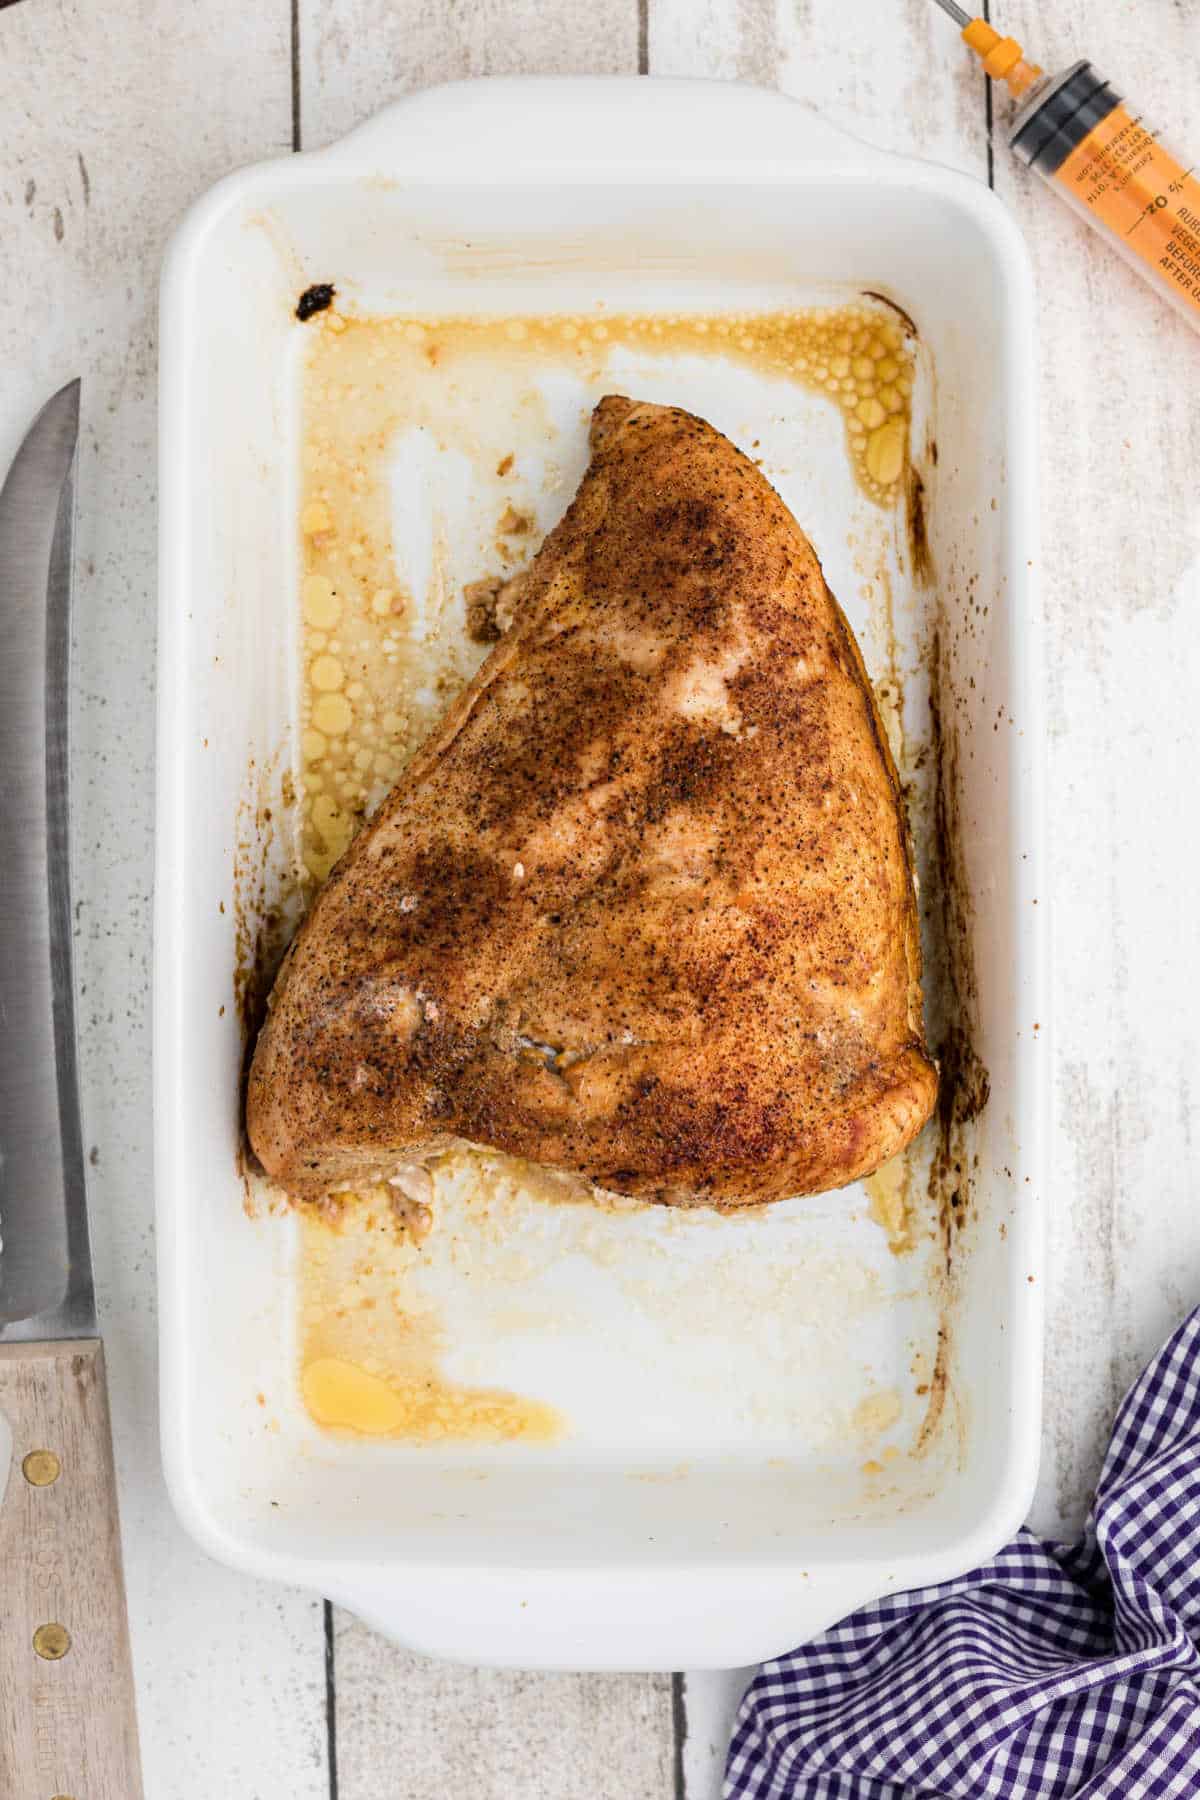 A cooked and seasoned turkey breast in a baking dish.